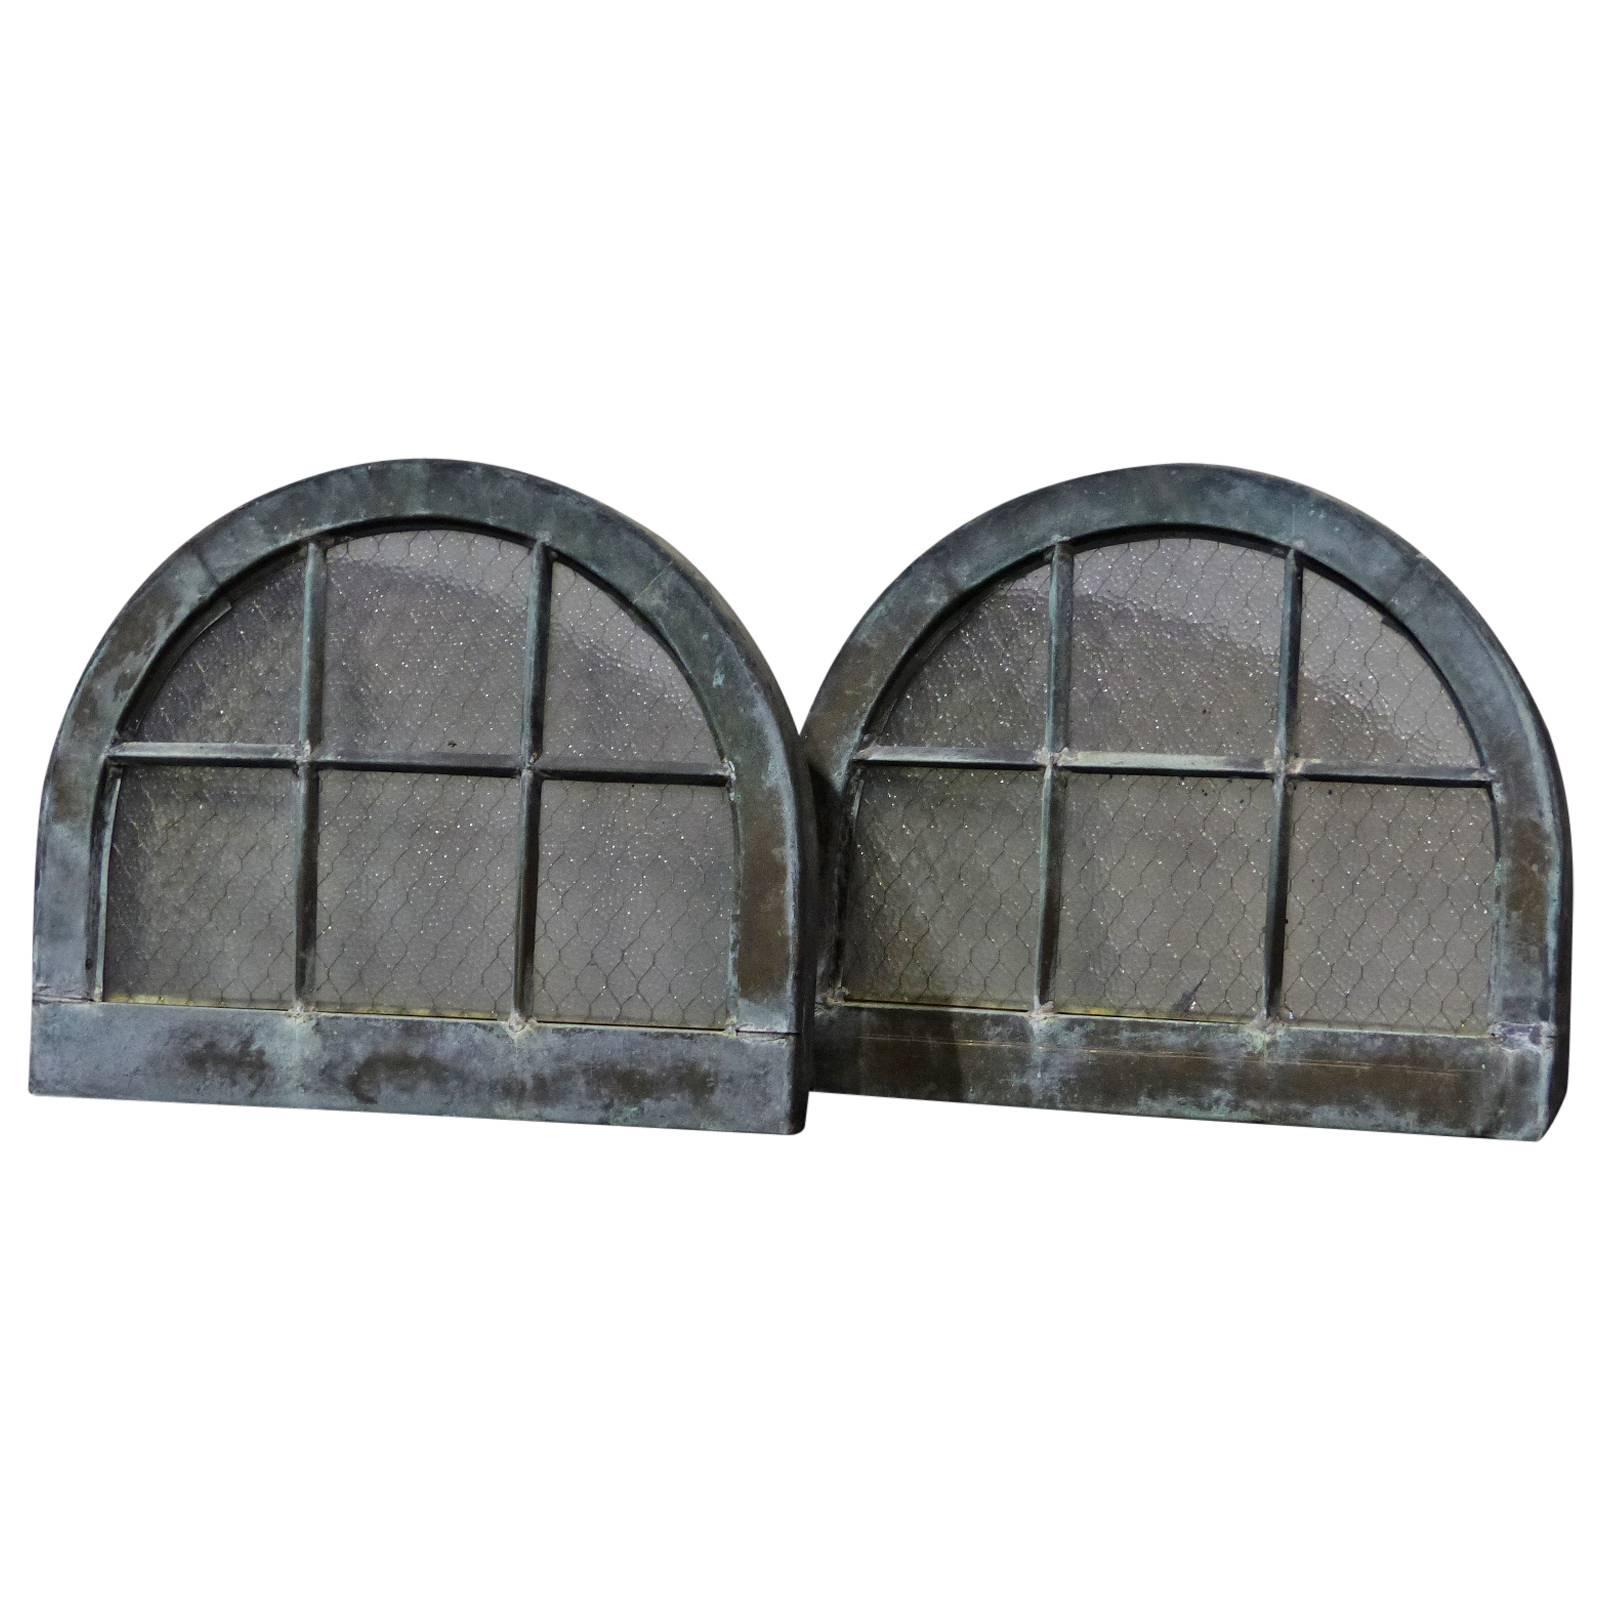 Pair of Arched Copper-Cladded Windows